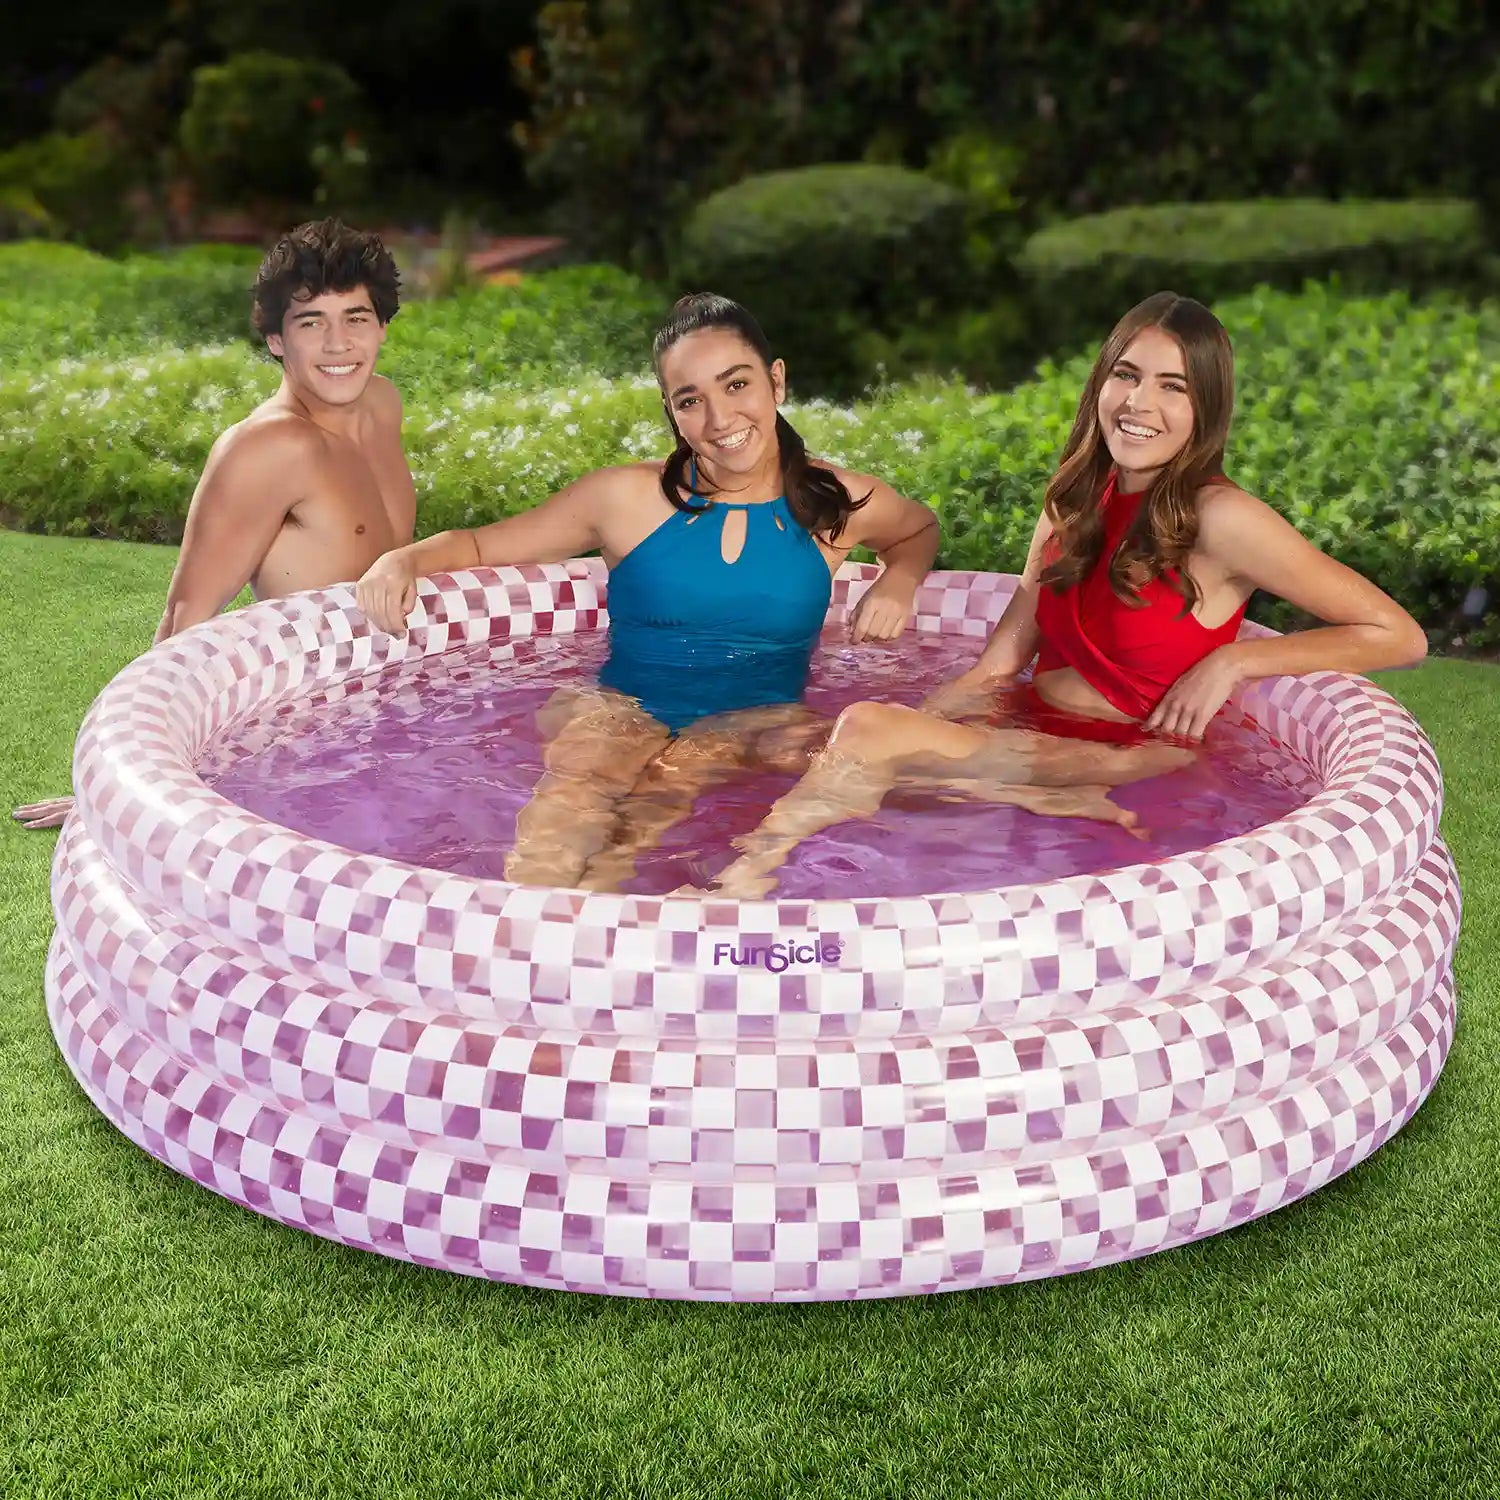 Funsicle Checkered Pool Lovely Lavender Color with 3 models on a grass background